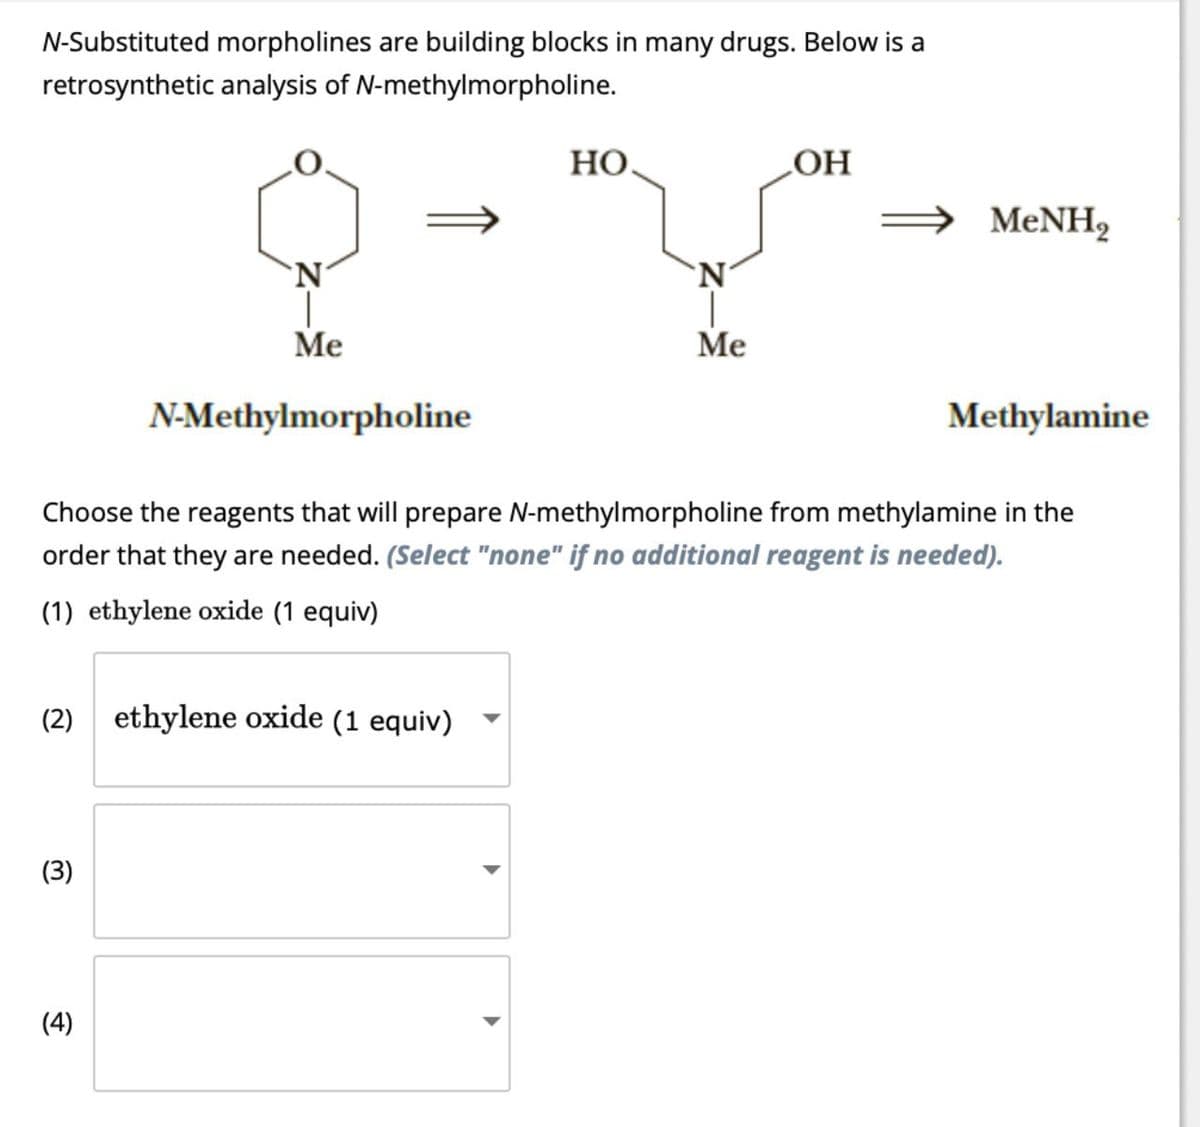 N-Substituted morpholines are building blocks in many drugs. Below is a
retrosynthetic analysis of N-methylmorpholine.
HO.
OH
⇒ MeNH2
N
Me
N-Methylmorpholine
N
Me
Methylamine
Choose the reagents that will prepare N-methylmorpholine from methylamine in the
order that they are needed. (Select "none" if no additional reagent is needed).
(1) ethylene oxide (1 equiv)
(2) ethylene oxide (1 equiv)
(3)
(4)